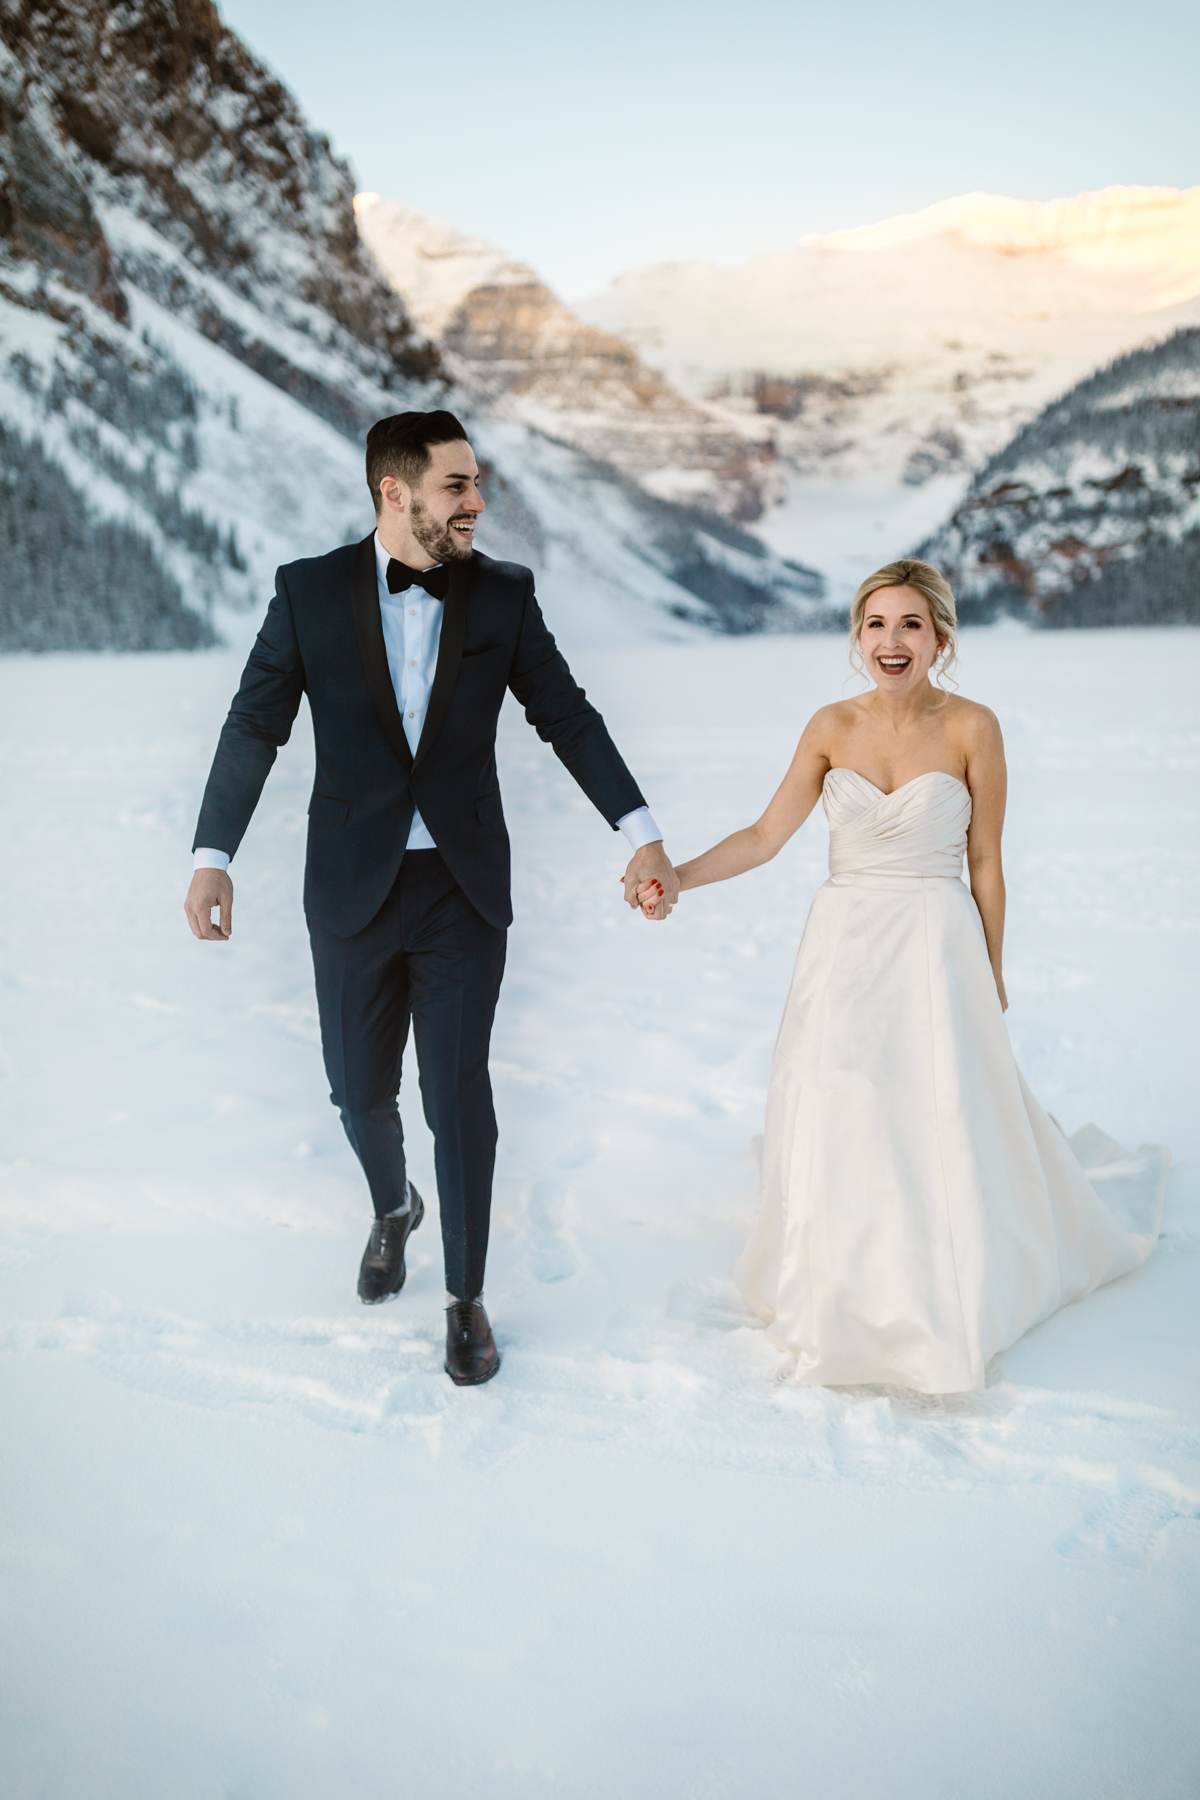 Fairmont Chateau Lake Louise Wedding Photography in Winter - Image 1